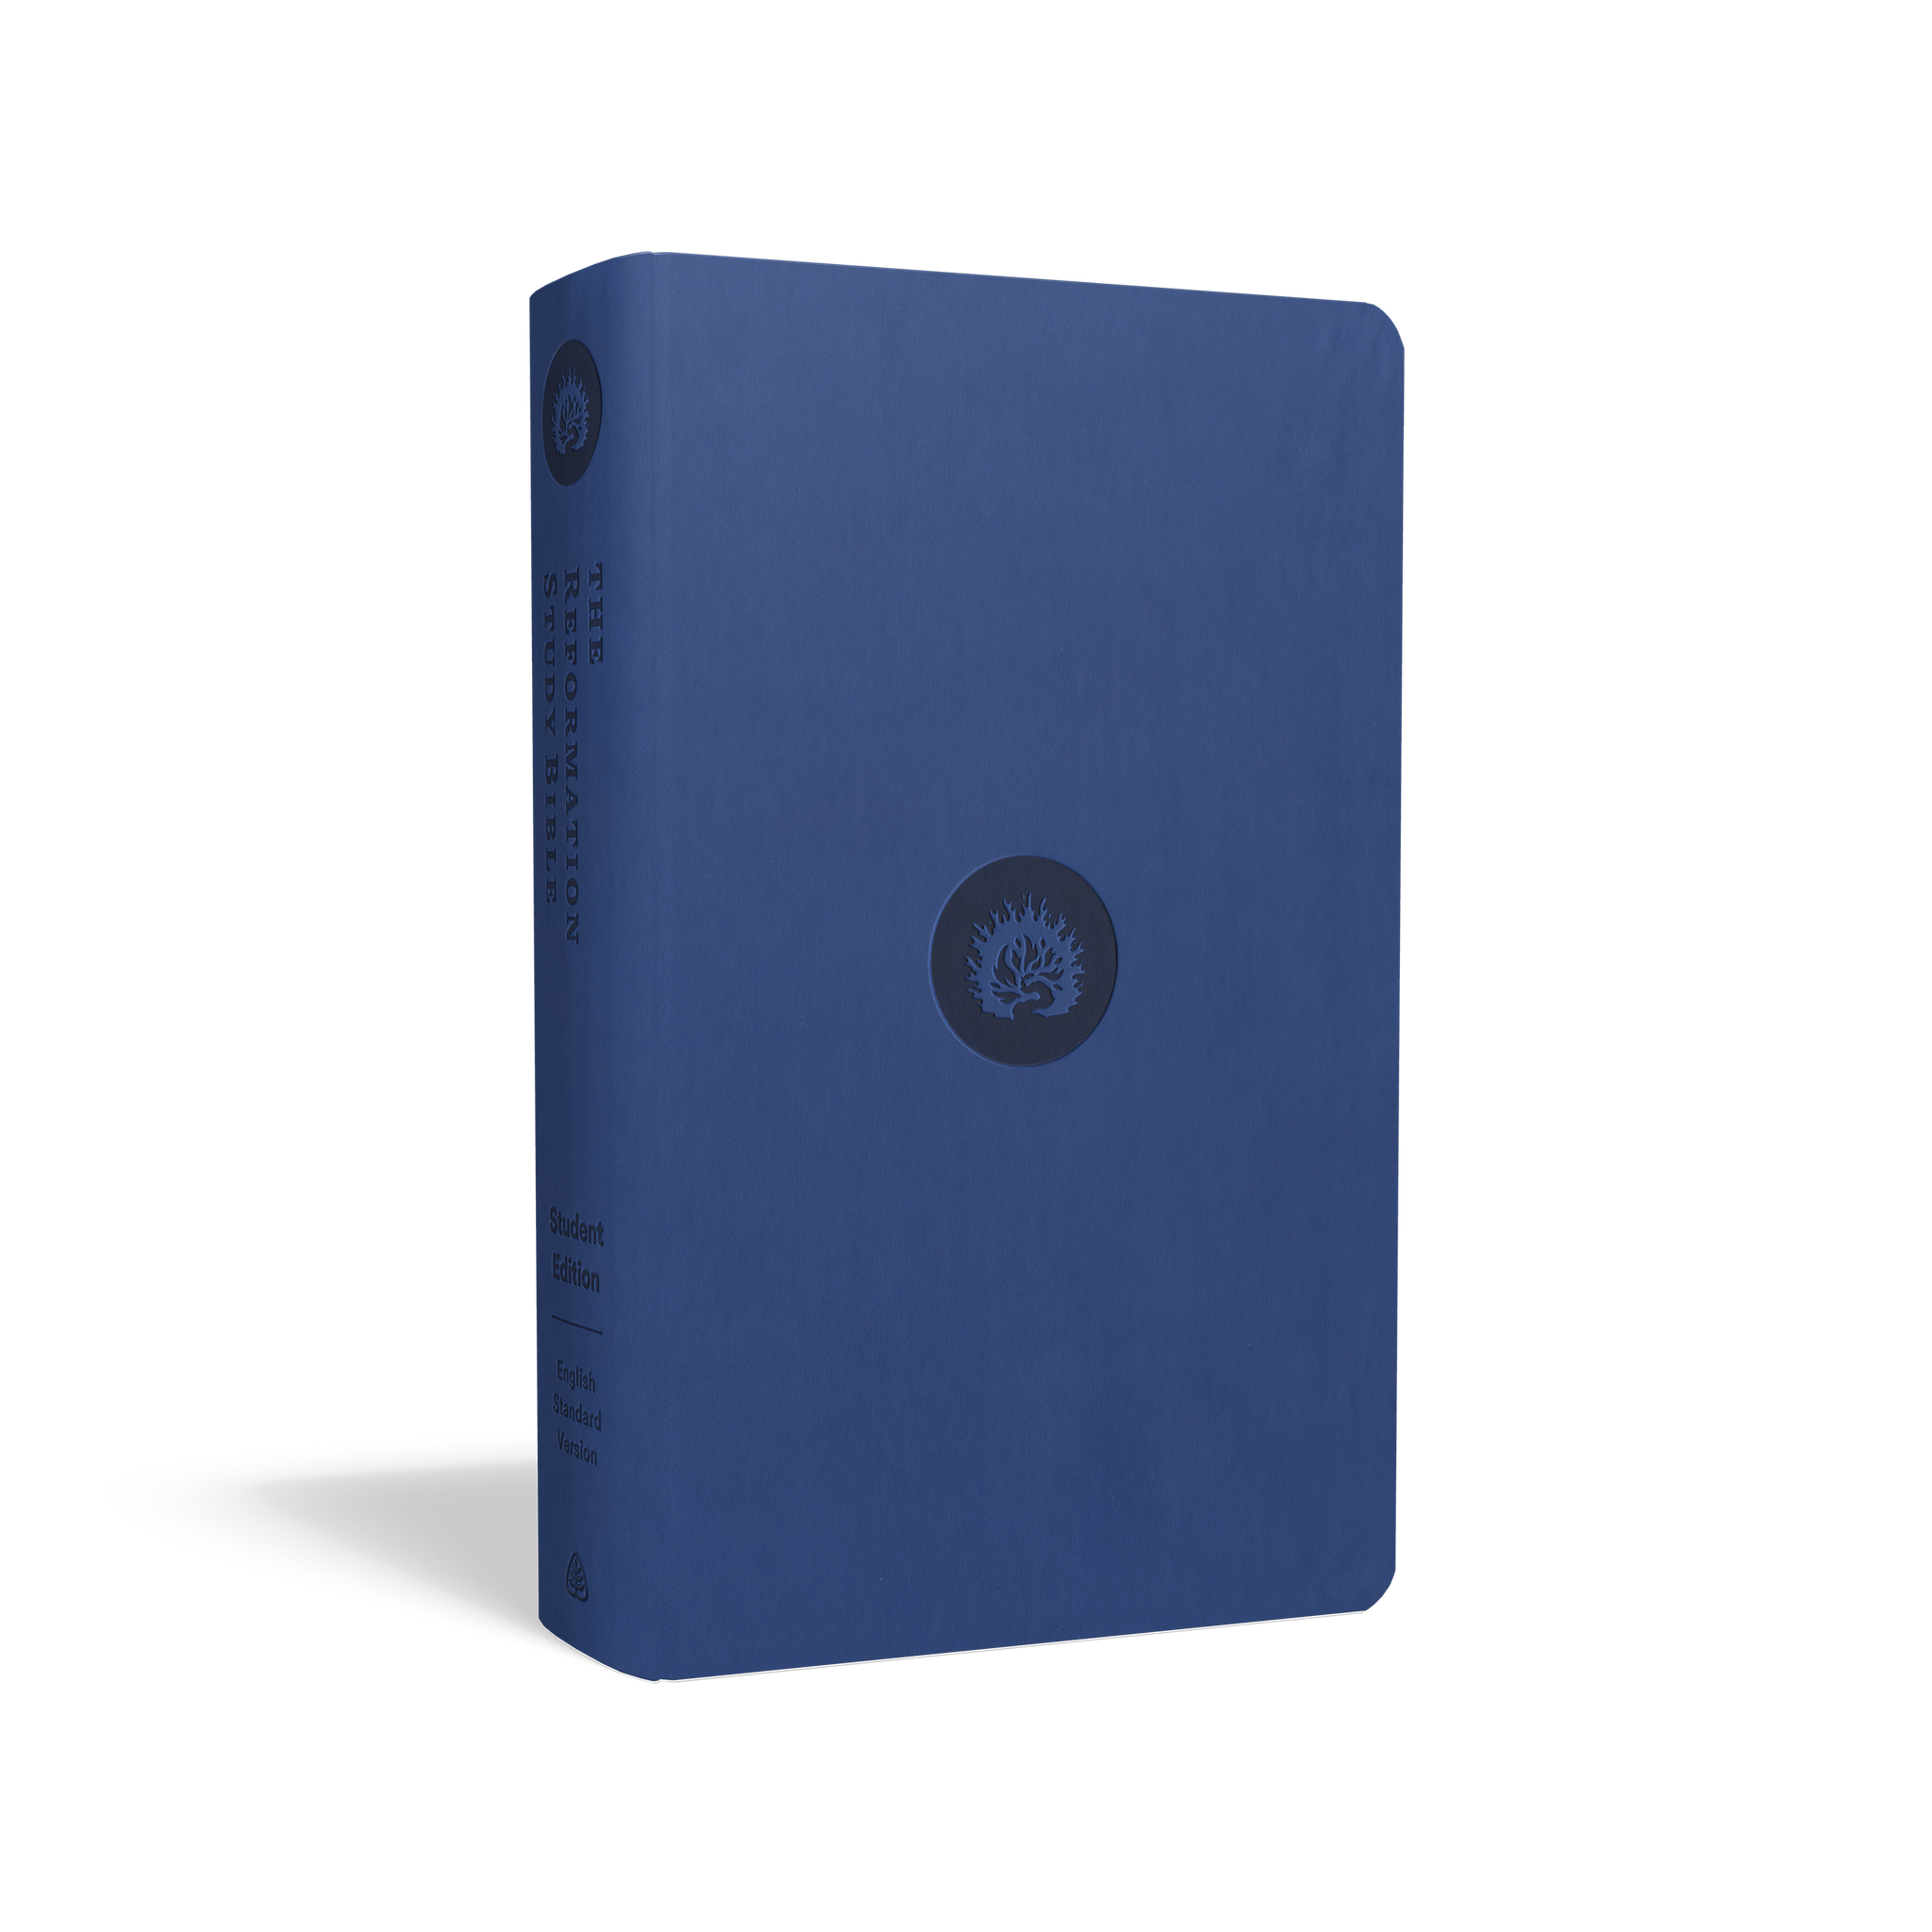 ESV Reformation Study Bible, Student Edition (Leather-like, Blue)